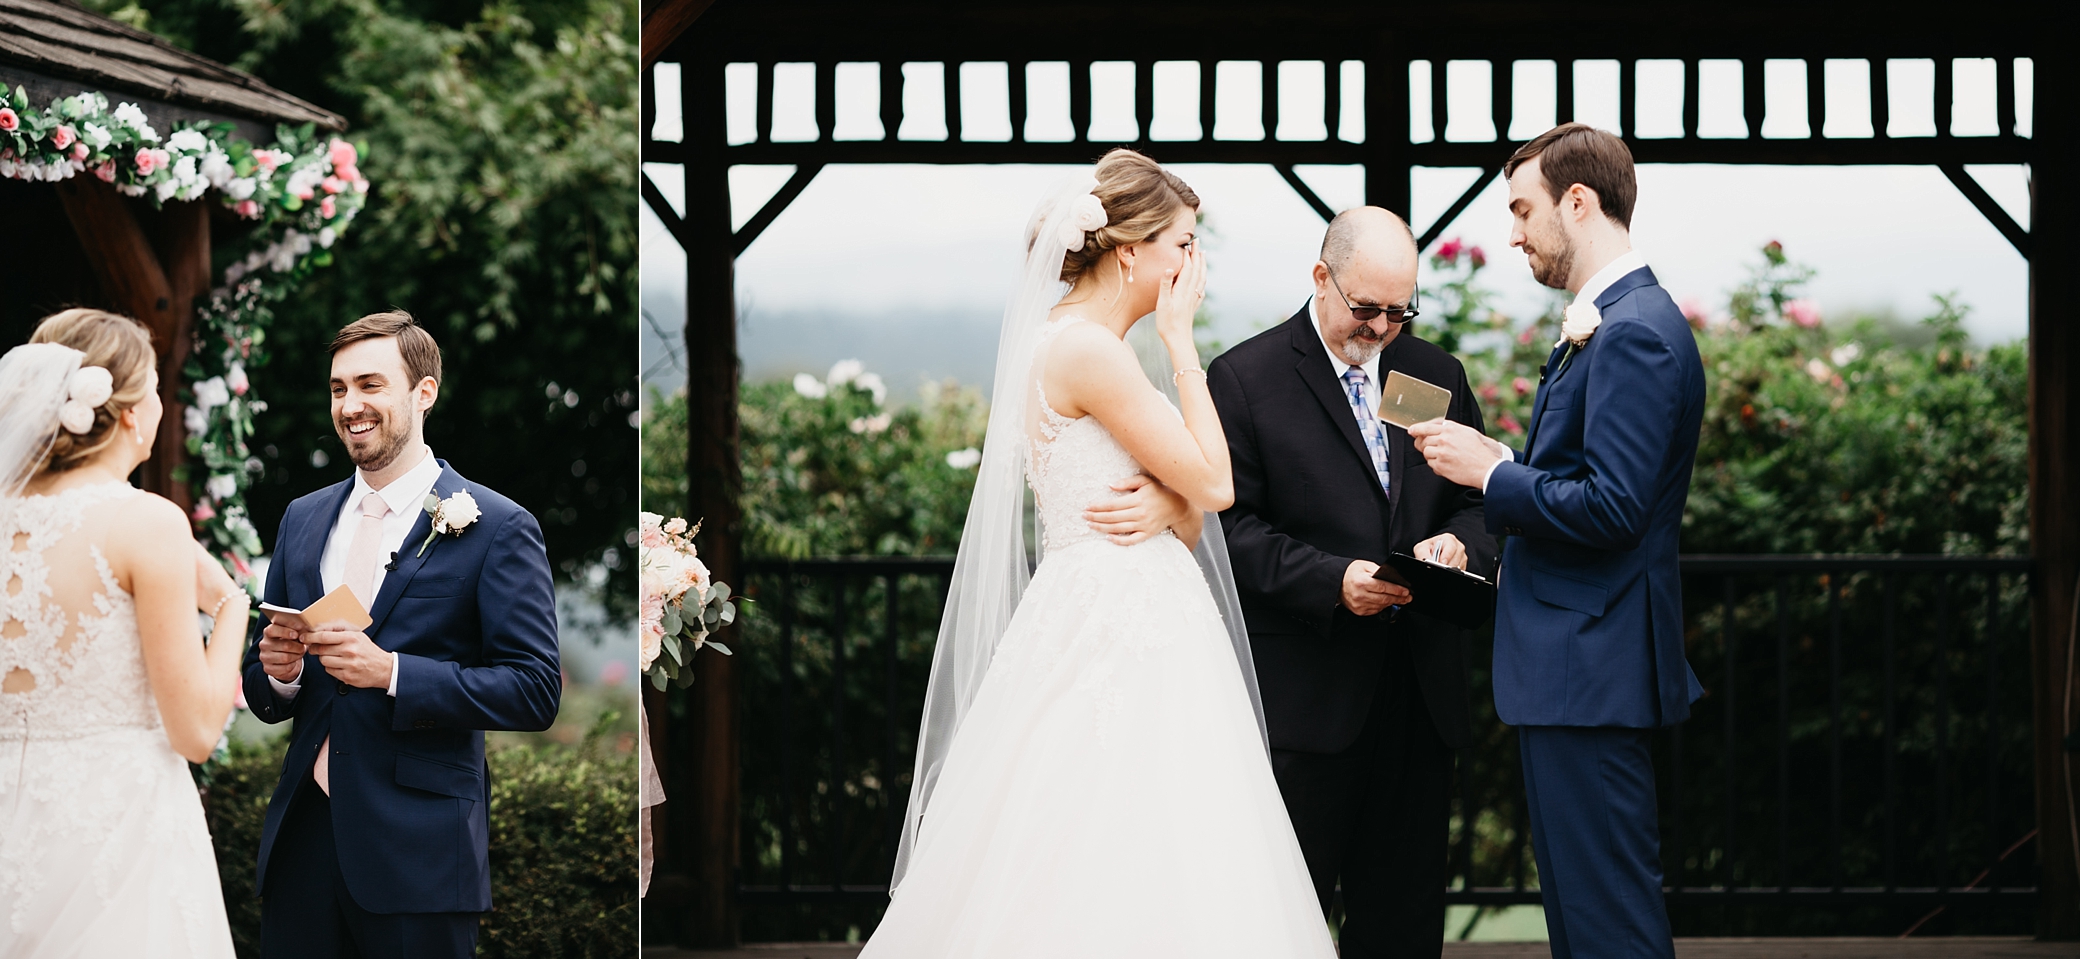 Ceremony and Vow Photos on Wedding Day | Must Have Moments on Your Wedding Day